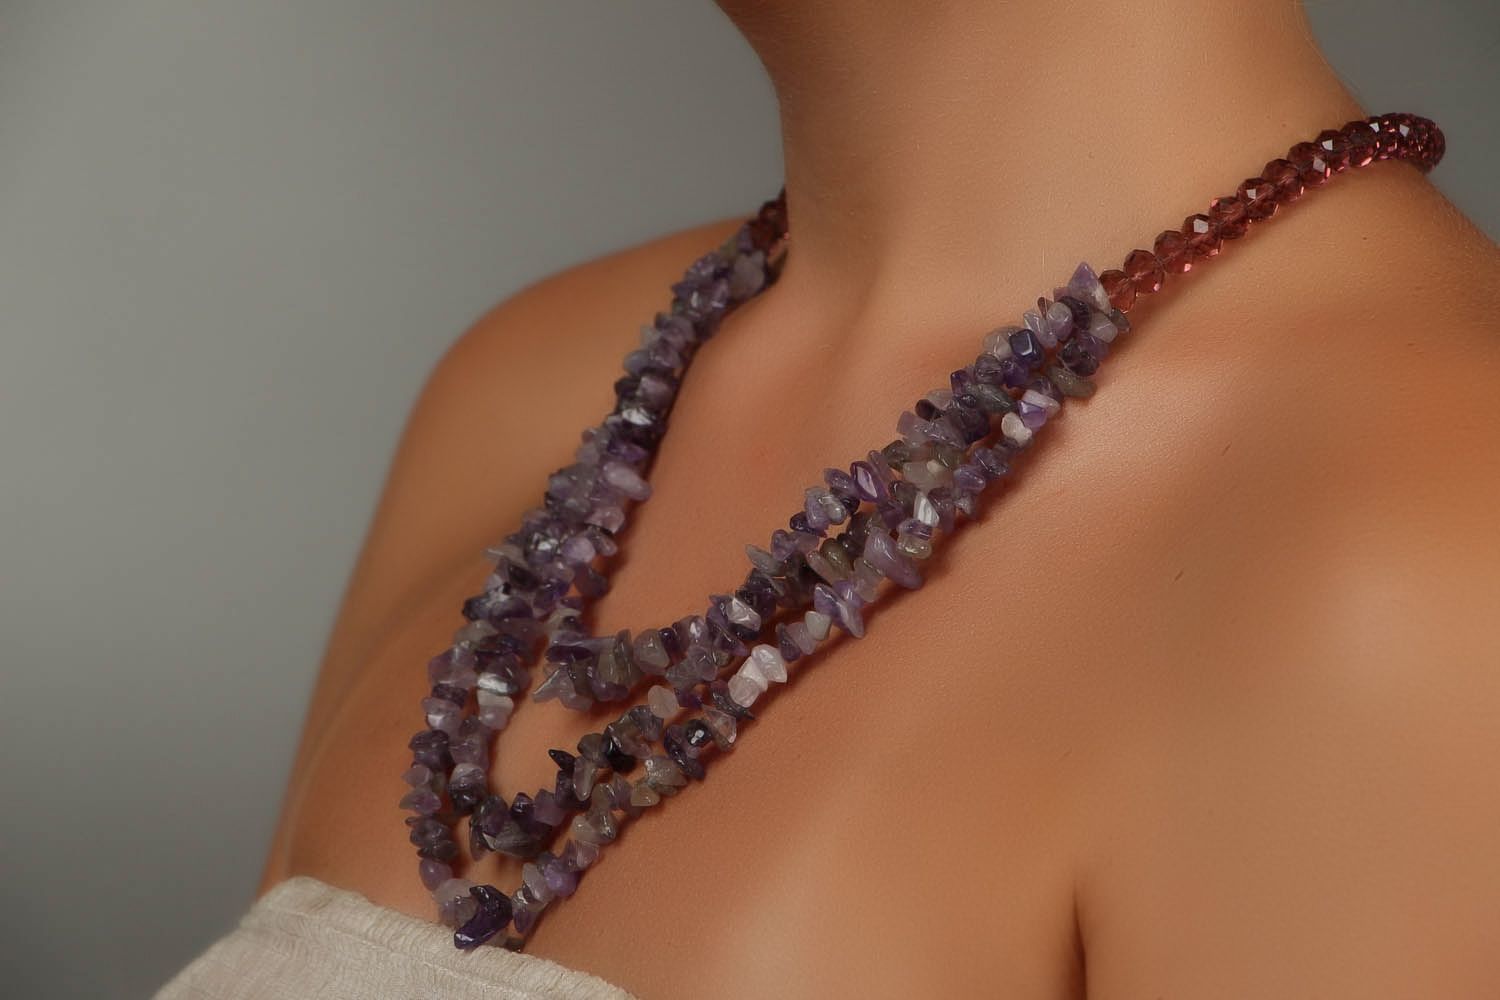 Bead necklace made of amethyst and glass photo 5